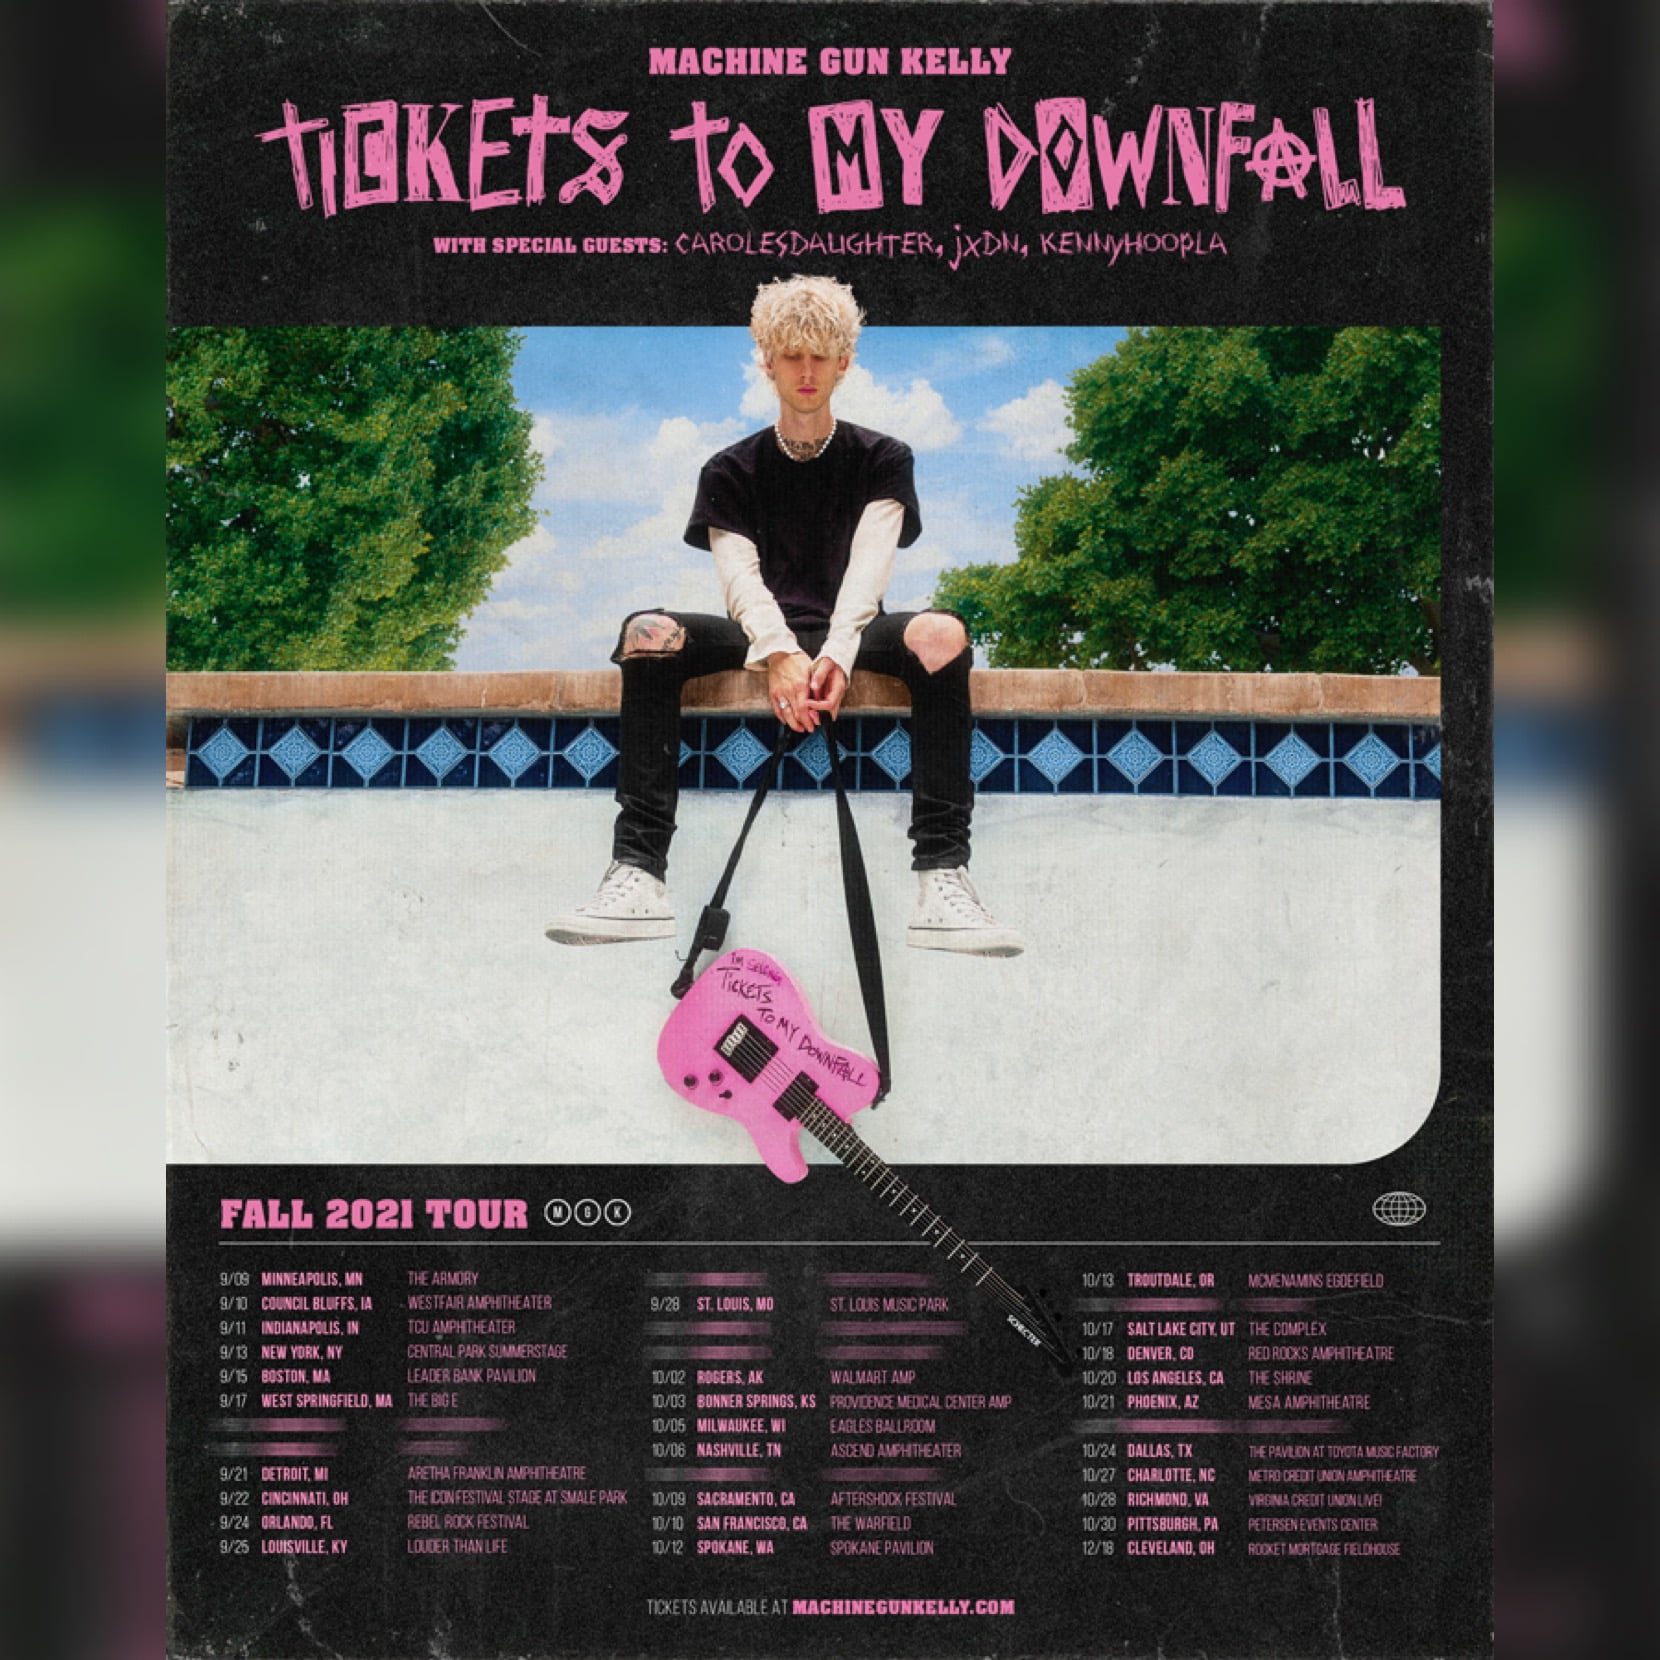 MGK “TICKETS TO MY DOWNFALL” Fall 2021 US tour poster via Rogers and Cowan PMK and Interscope Records for use by 360 Magazine